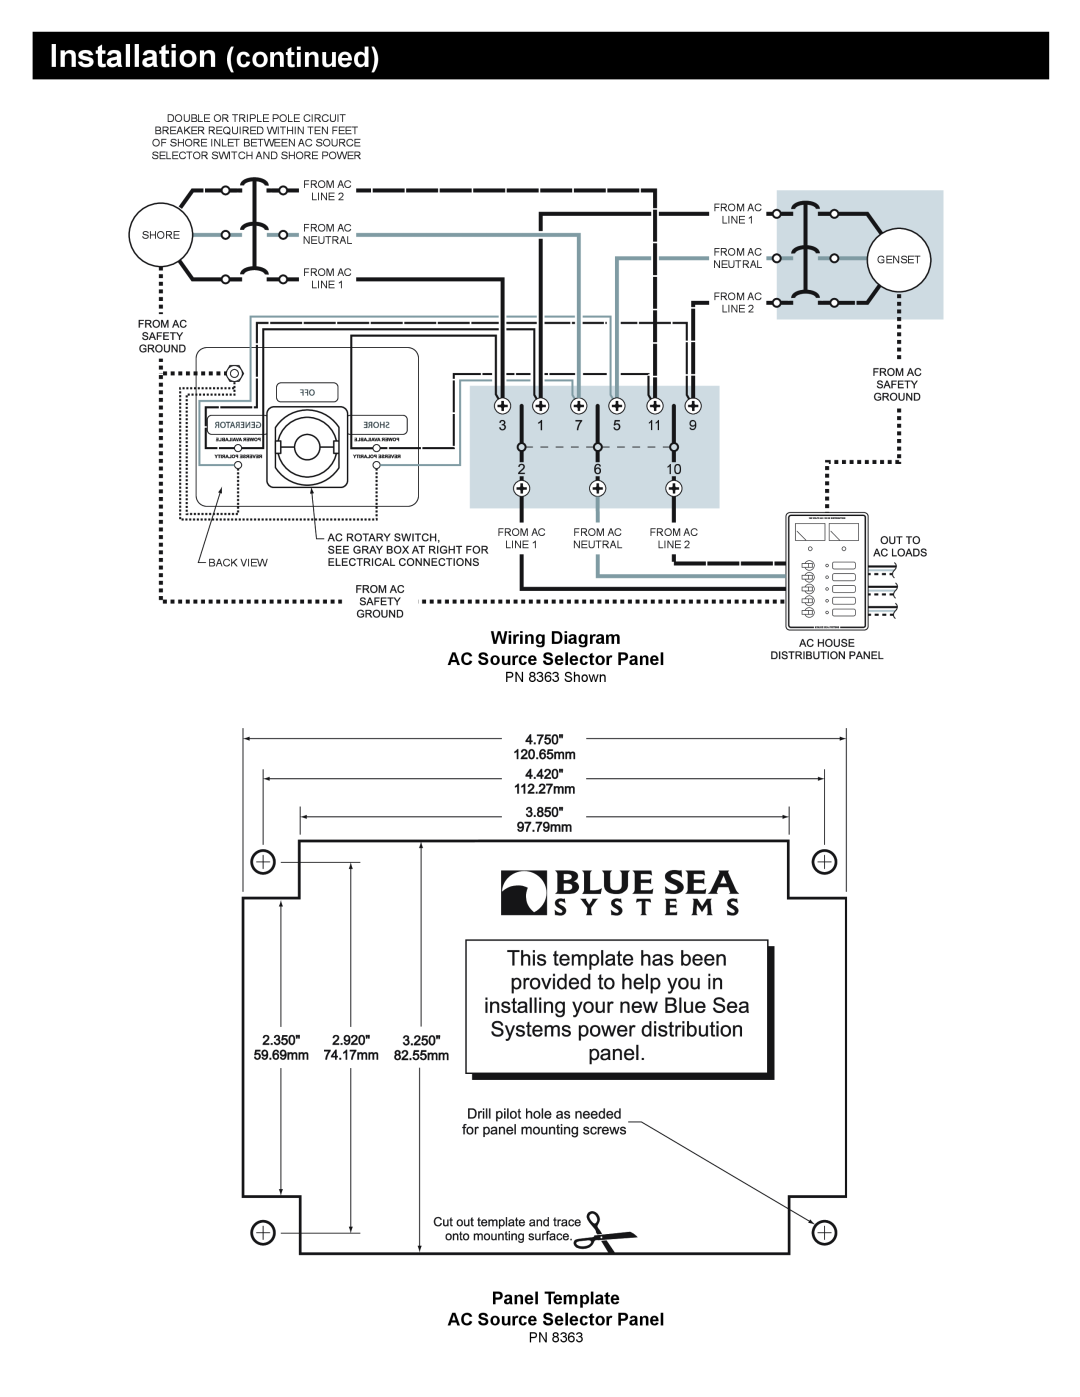 Blue Sea Systems Wiring Diagram AC Source Selector Panel, Panel Template AC Source Selector Panel, PN 8363 Shown 